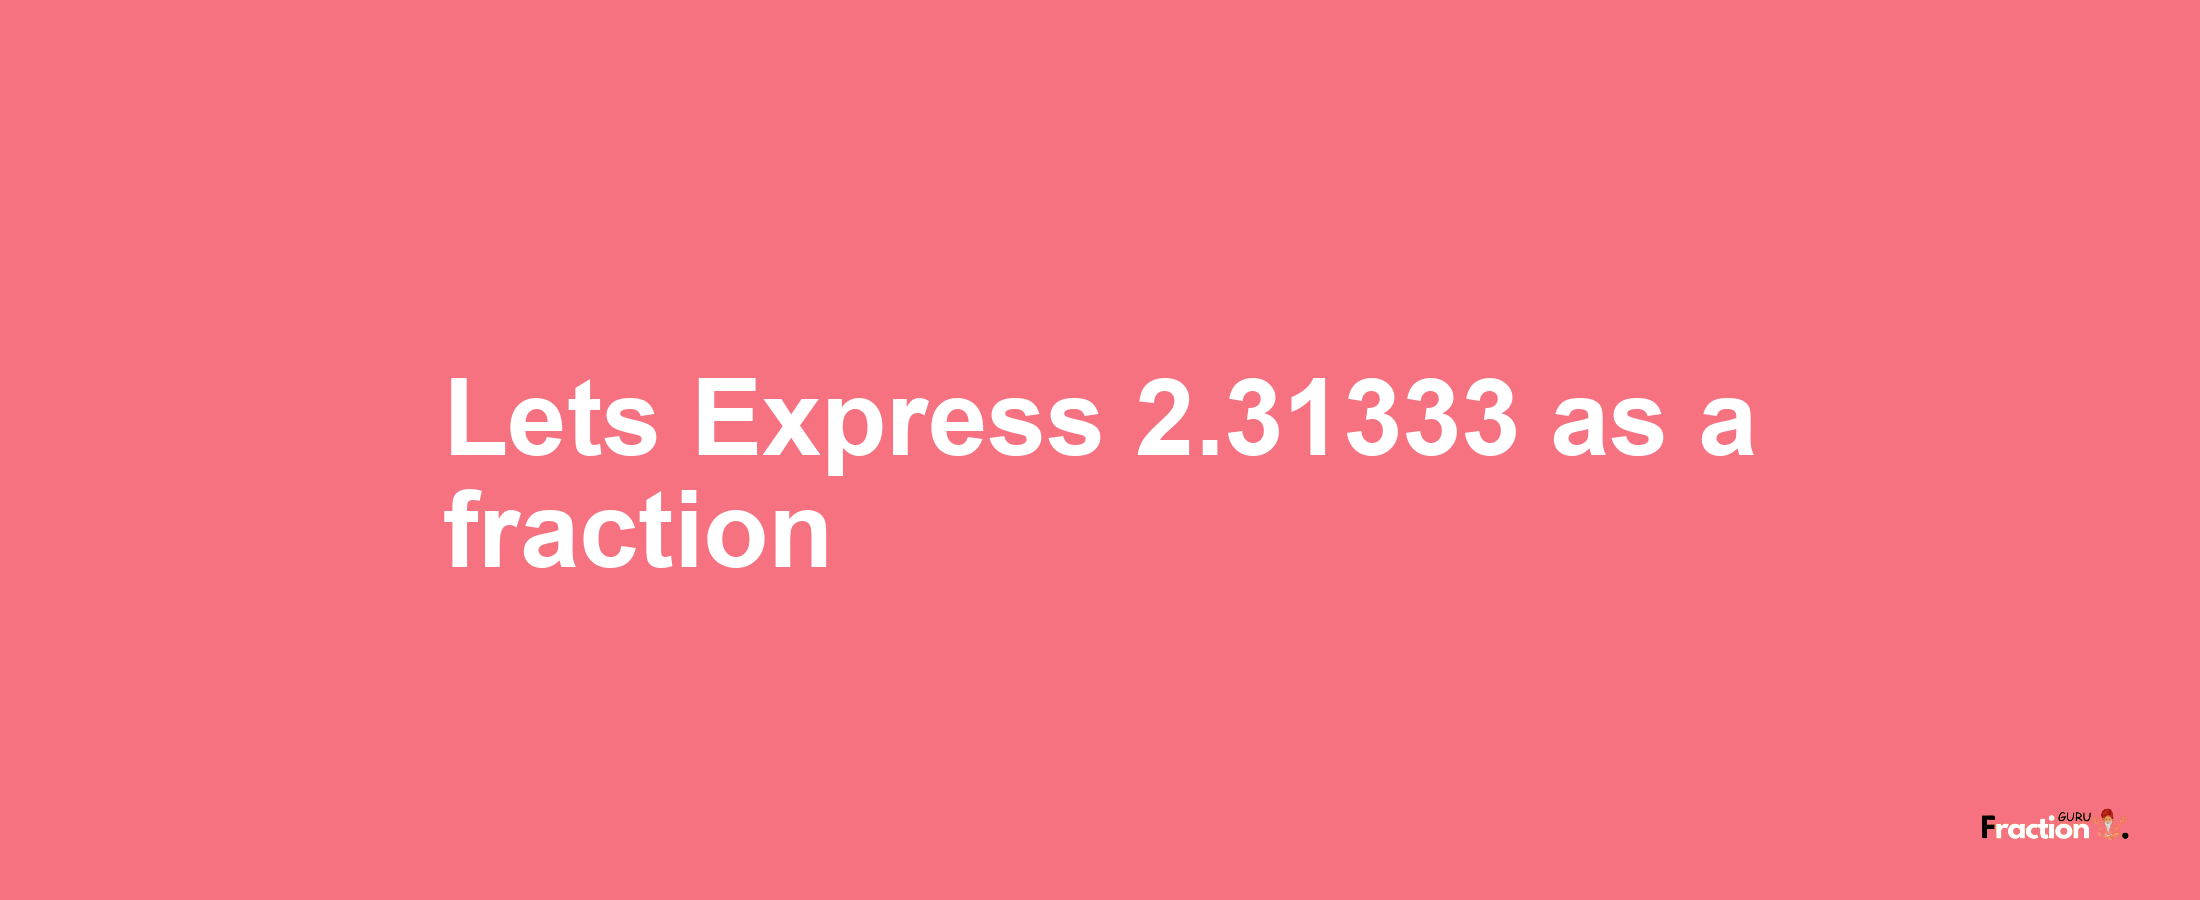 Lets Express 2.31333 as afraction